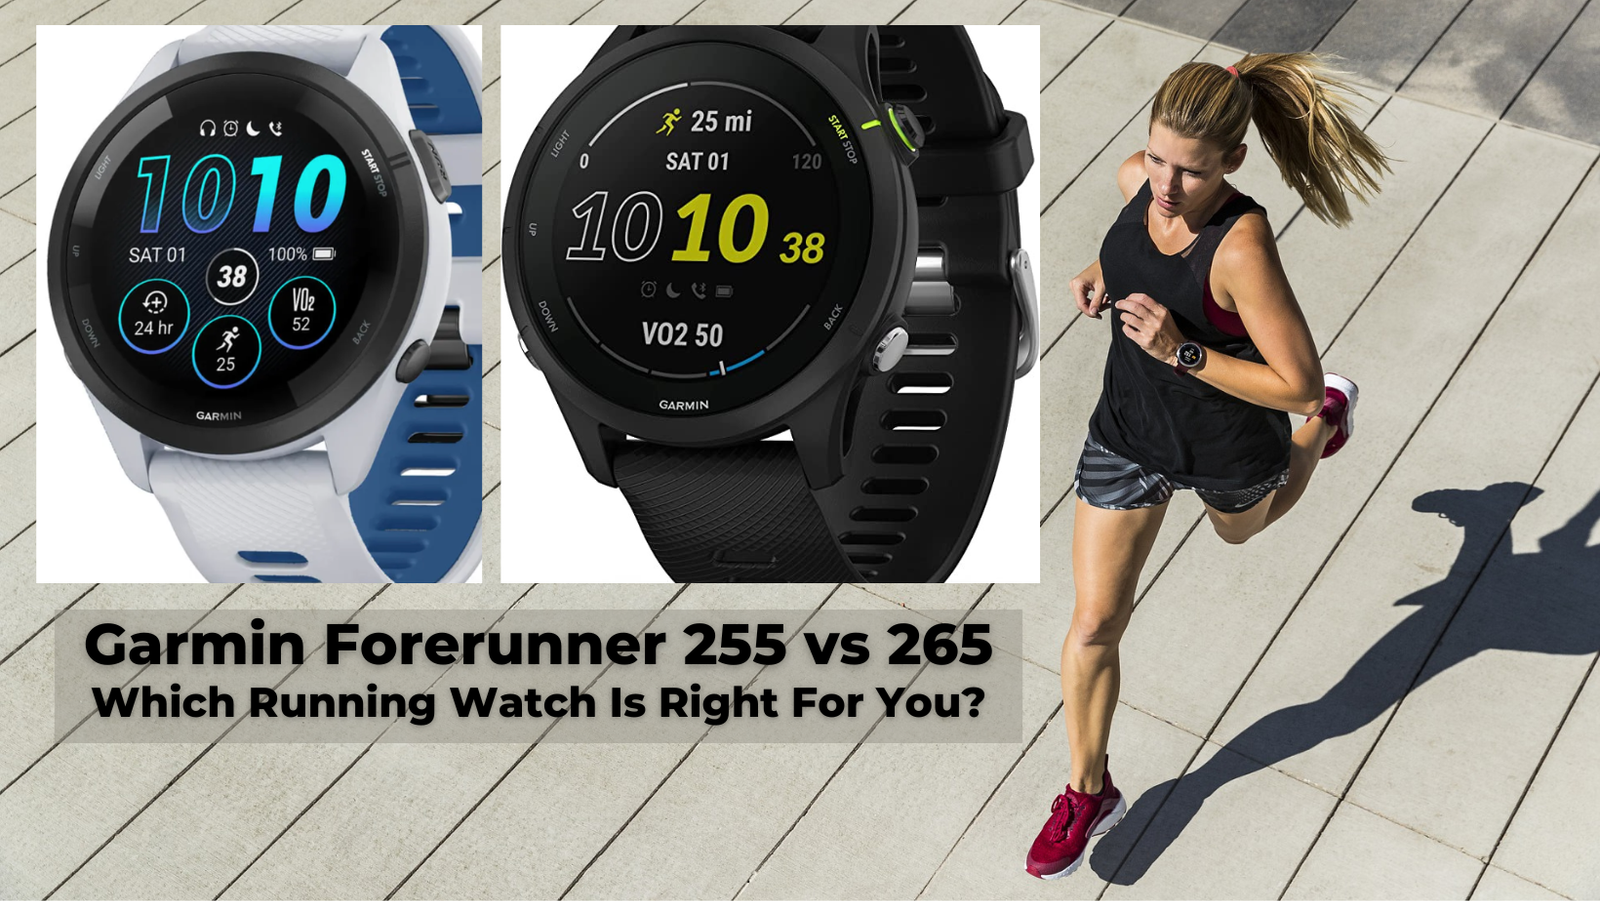 Forerunner 265 vs 255 vs Do Need the Newest Watch?